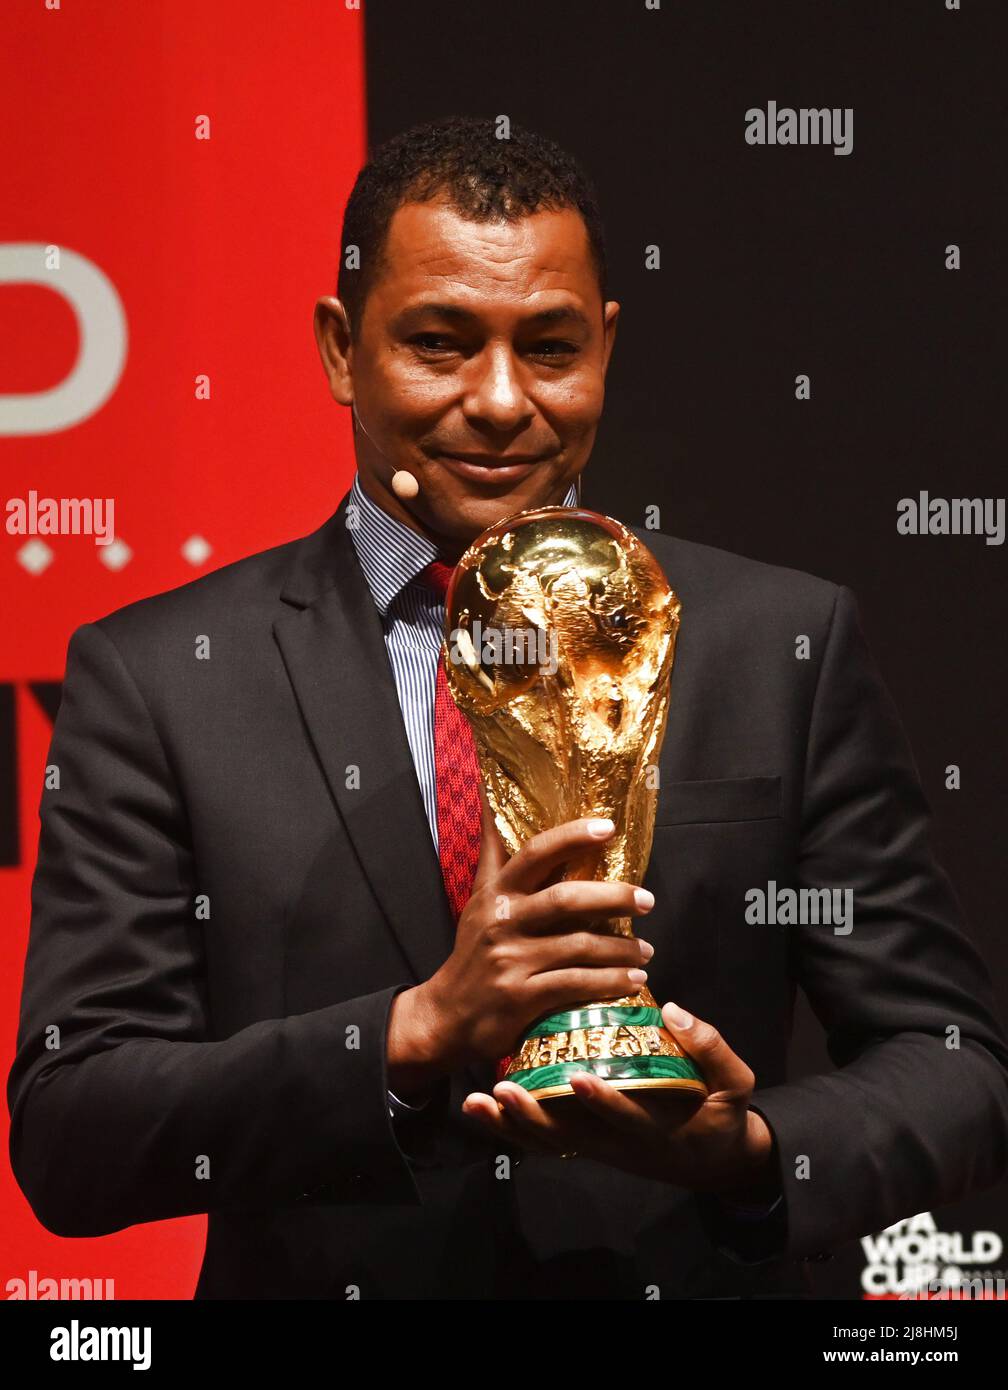 Kuwait City. 16th May, 2022. Brazilian former soccer player Gilberto Silva displays the World Cup trophy during a FIFA World Cup Trophy Tour event in Kuwait City, Kuwait, May 16, 2022. Credit: Xinhua/Alamy Live News Stock Photo